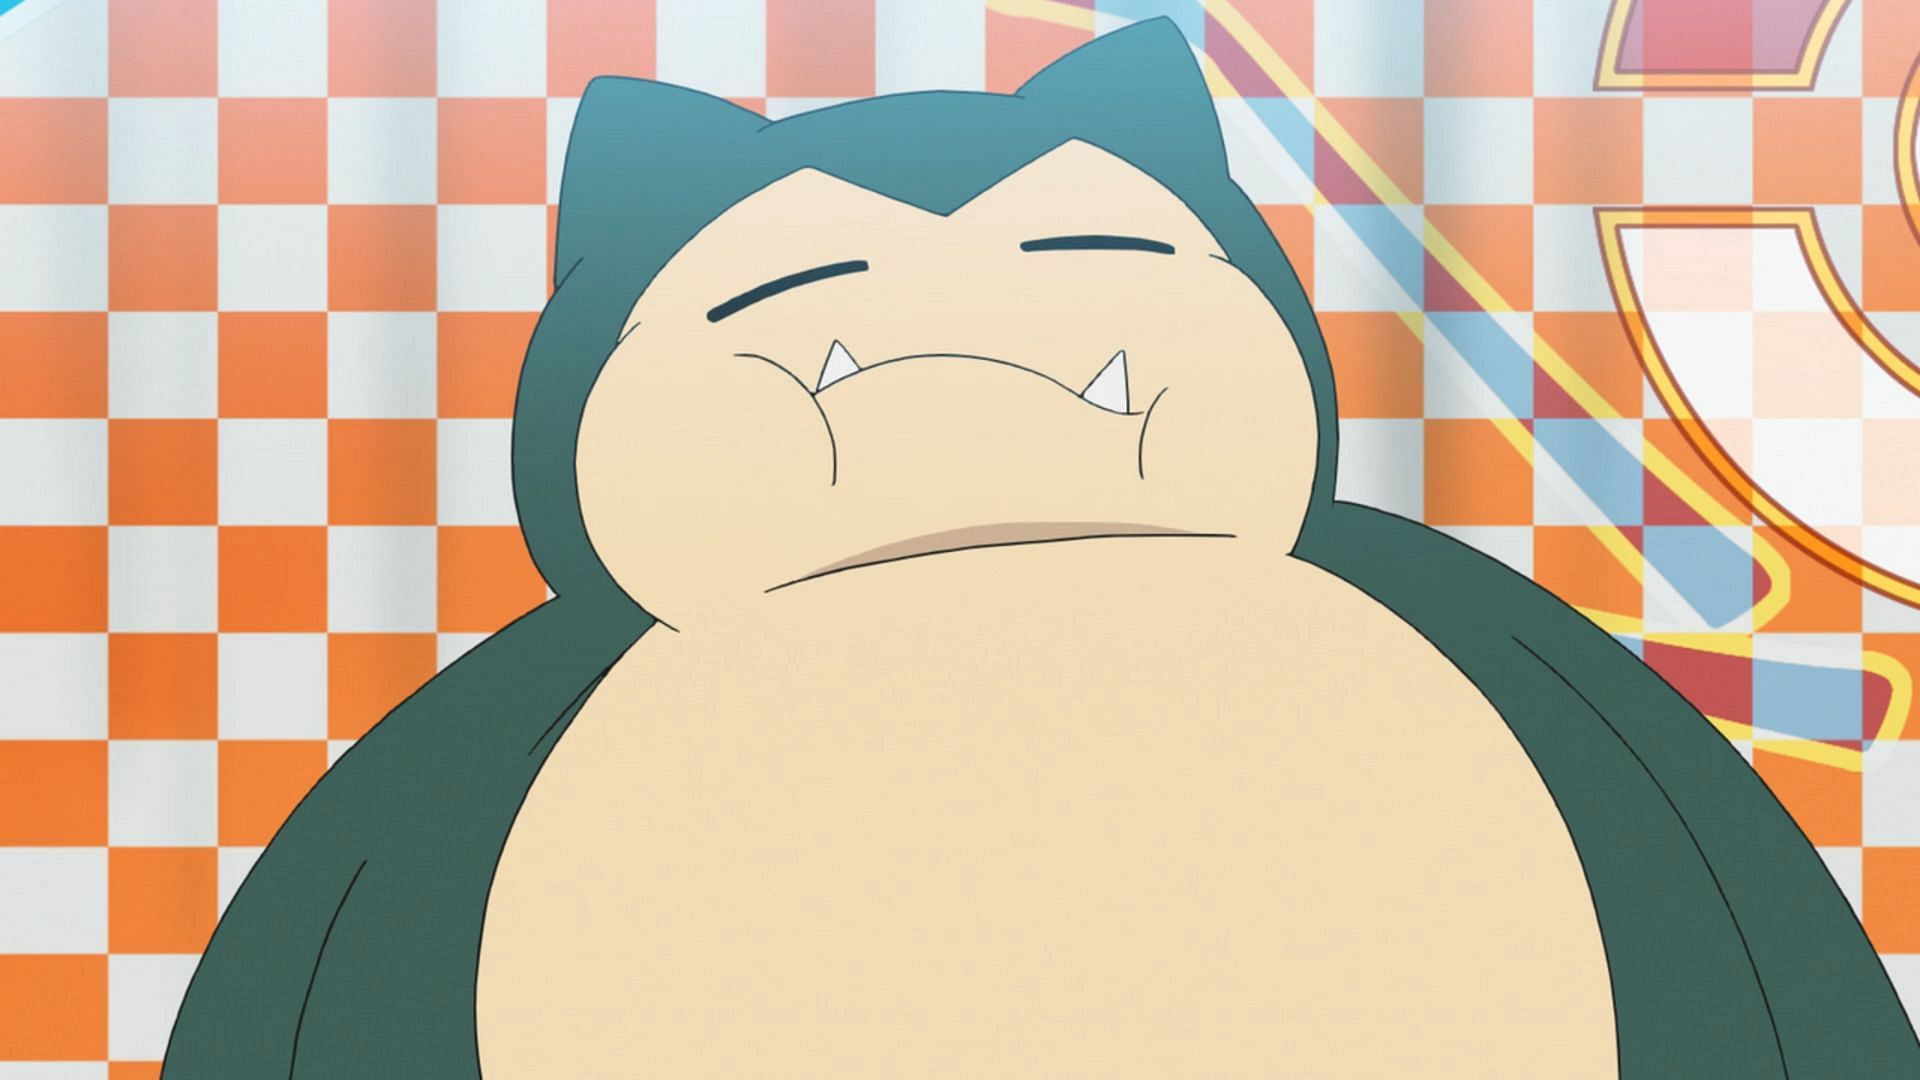 Snorlax is one of the many Kanto Pokemon appearing in this event (Image via The Pokemon Company)